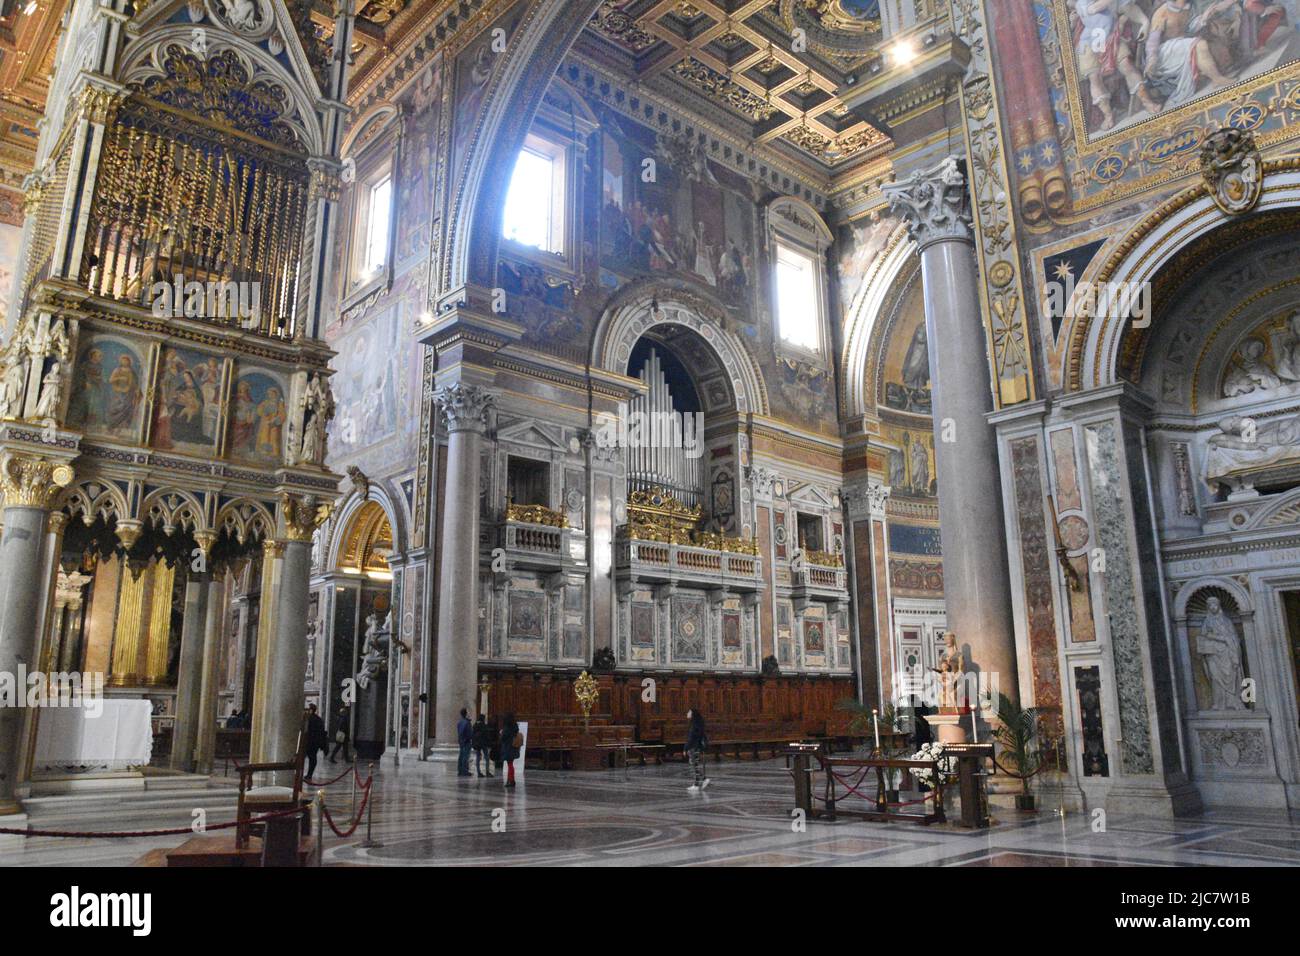 The High Altar and Ciborium in Archbasilica Cathedral of the Most Holy Savior and of Saints John the Baptist and John the Evangelist in the Lateran, R Stock Photo